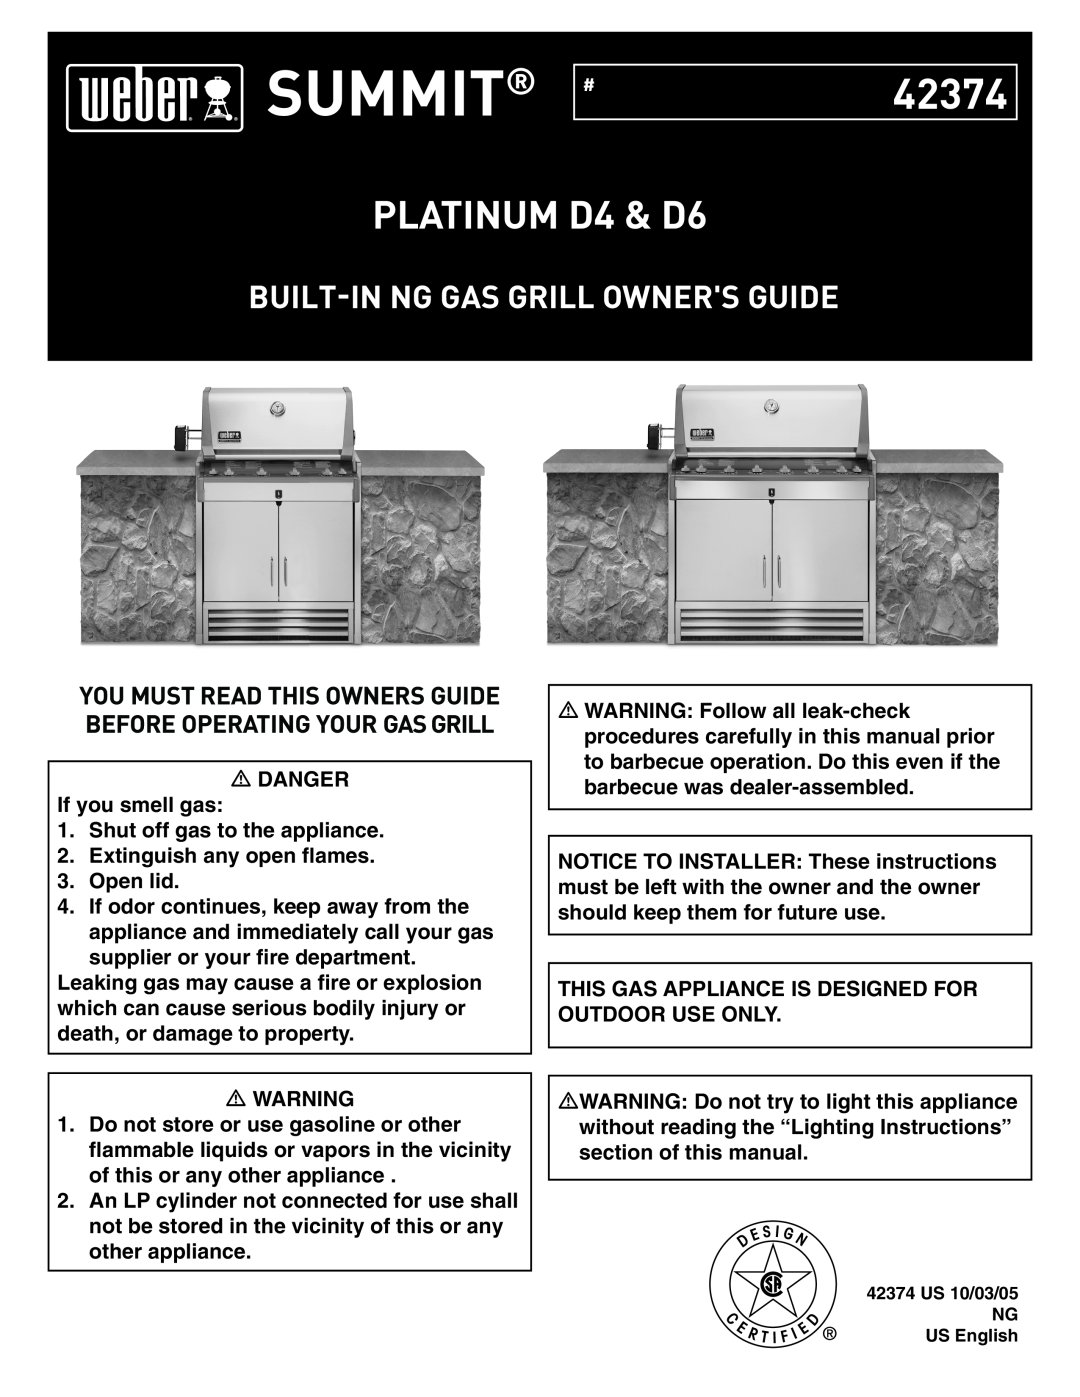 Weber manual Built-In Ng Gas Grill Owners Guide, Summit #, 42374, PLATINUM D4 & D6 